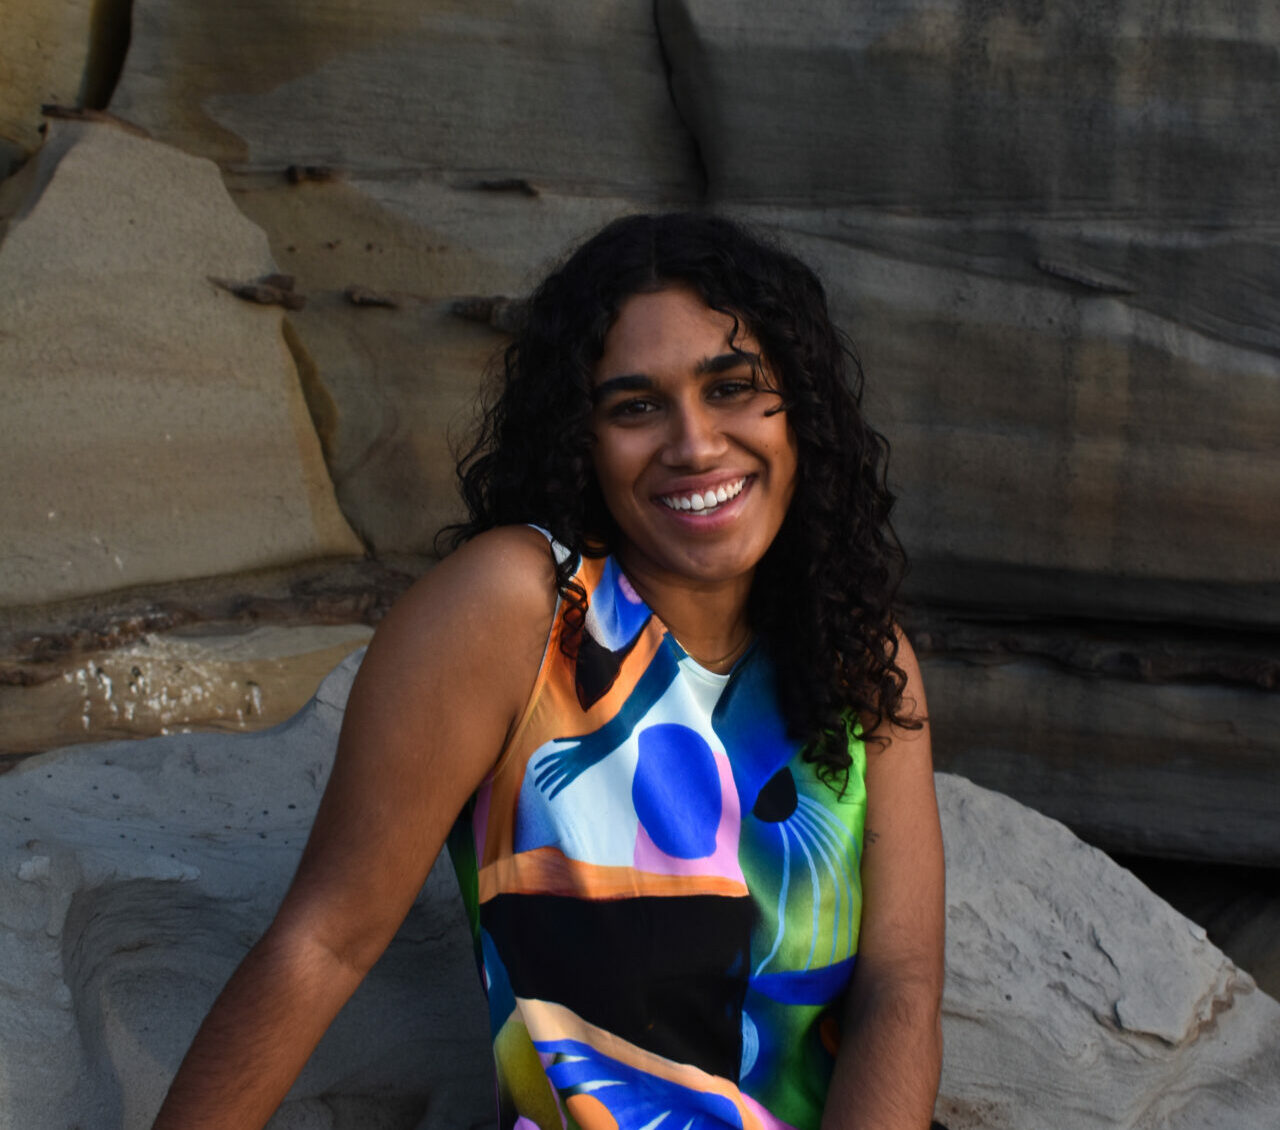 A dark-skinned woman with long curly black hair sits on a rock, smiling widely in a colourful dress